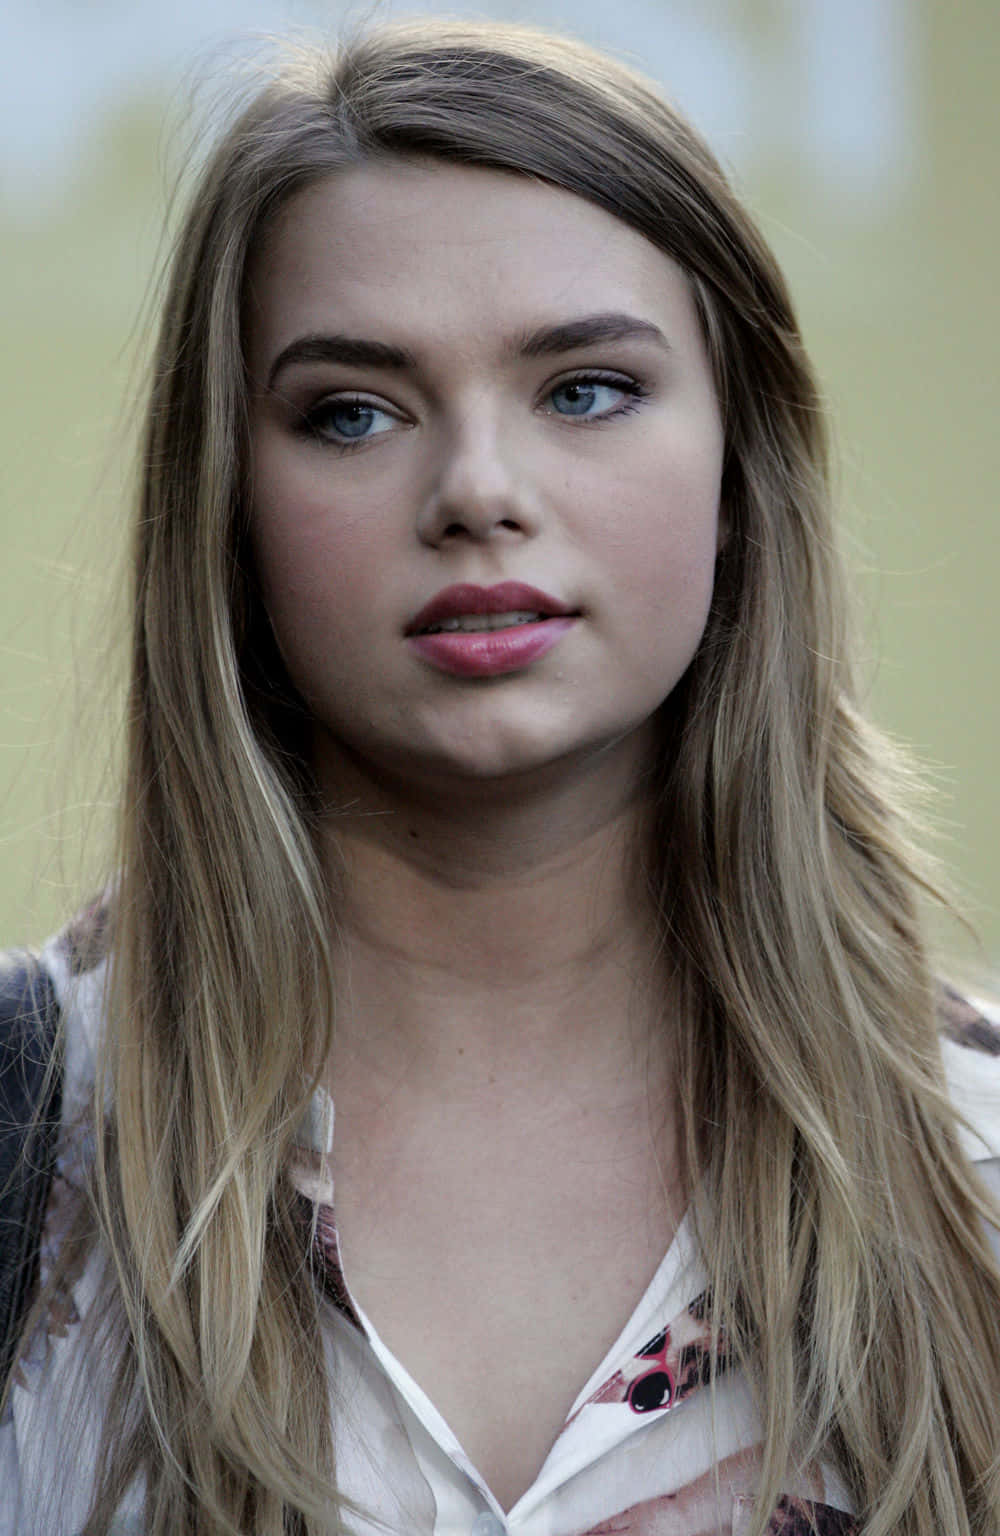 Indiana Evans, A Radiant Beauty In A Mesmerizing Pose. Wallpaper